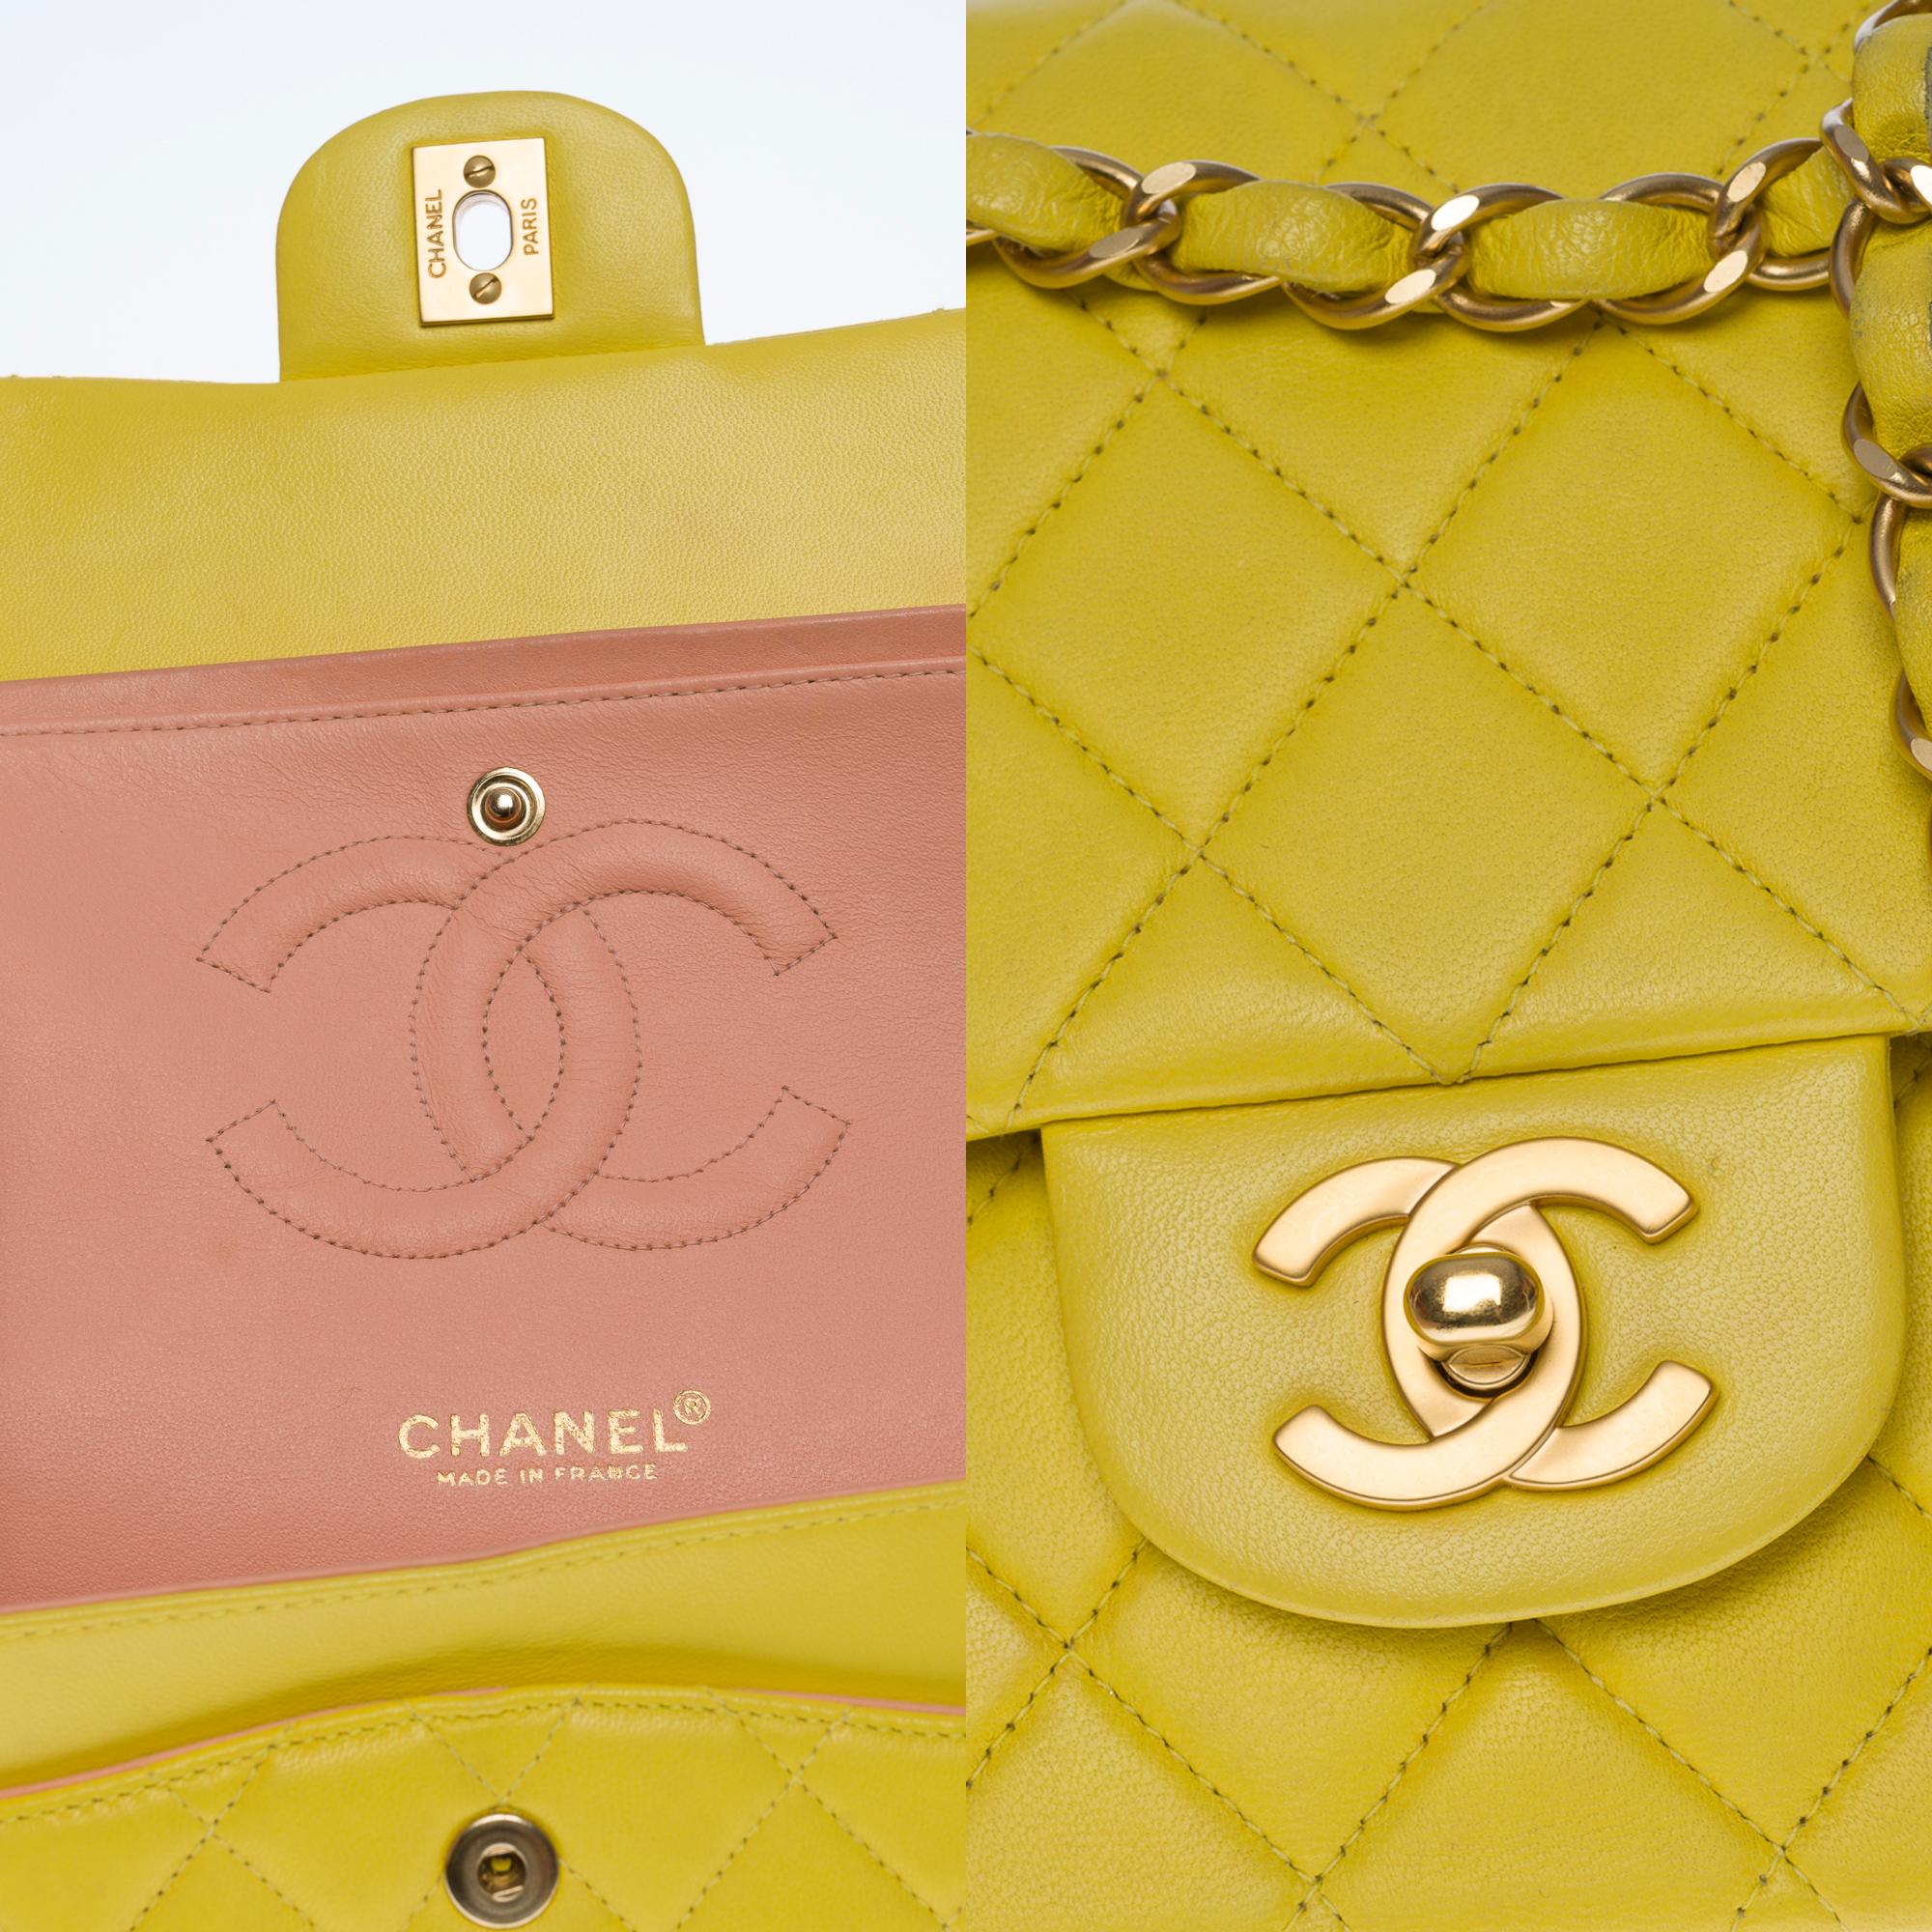 Chanel Timeless Medium double flap shoulder bag in Yellow quilted lambskin , BGHW 2